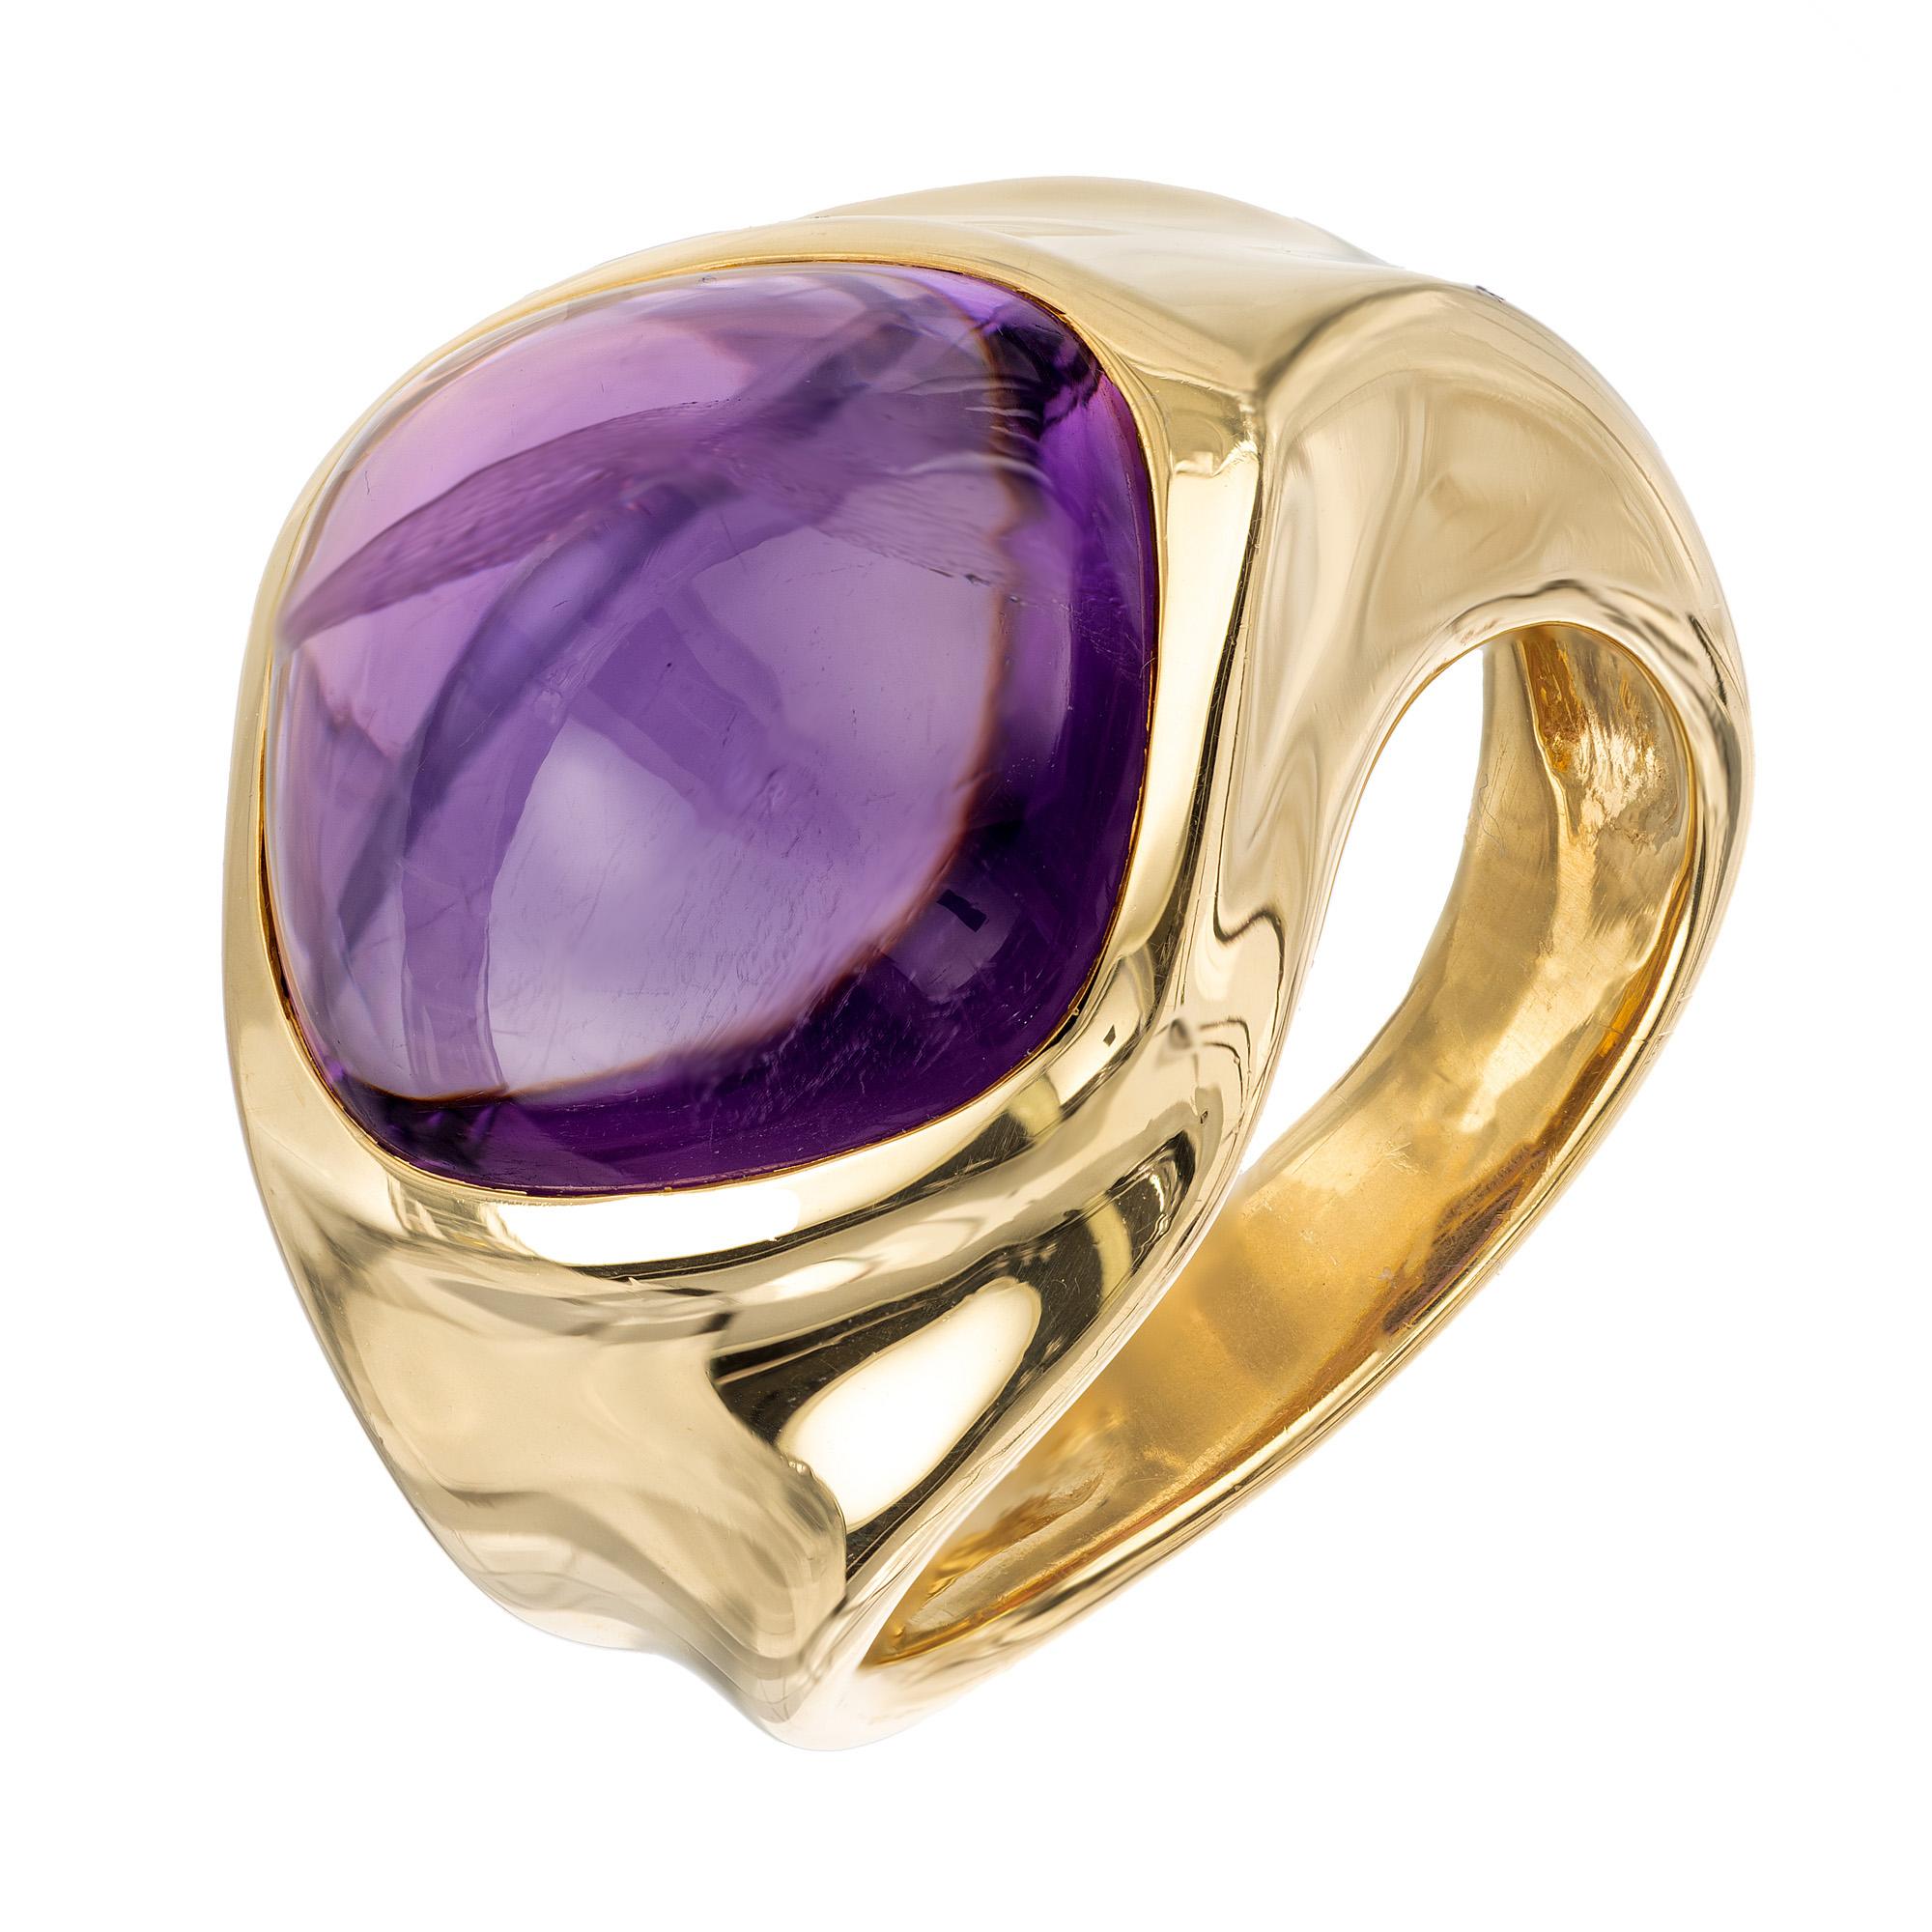 A wonderful vintage 1980's, 18k yellow gold, 8.00 carat cabochon amethyst bezel ring. The ring features an intricate twist design on the shank that adds a modern aspect to the classic beauty of the amethyst gemstone. The rich purple hue of the